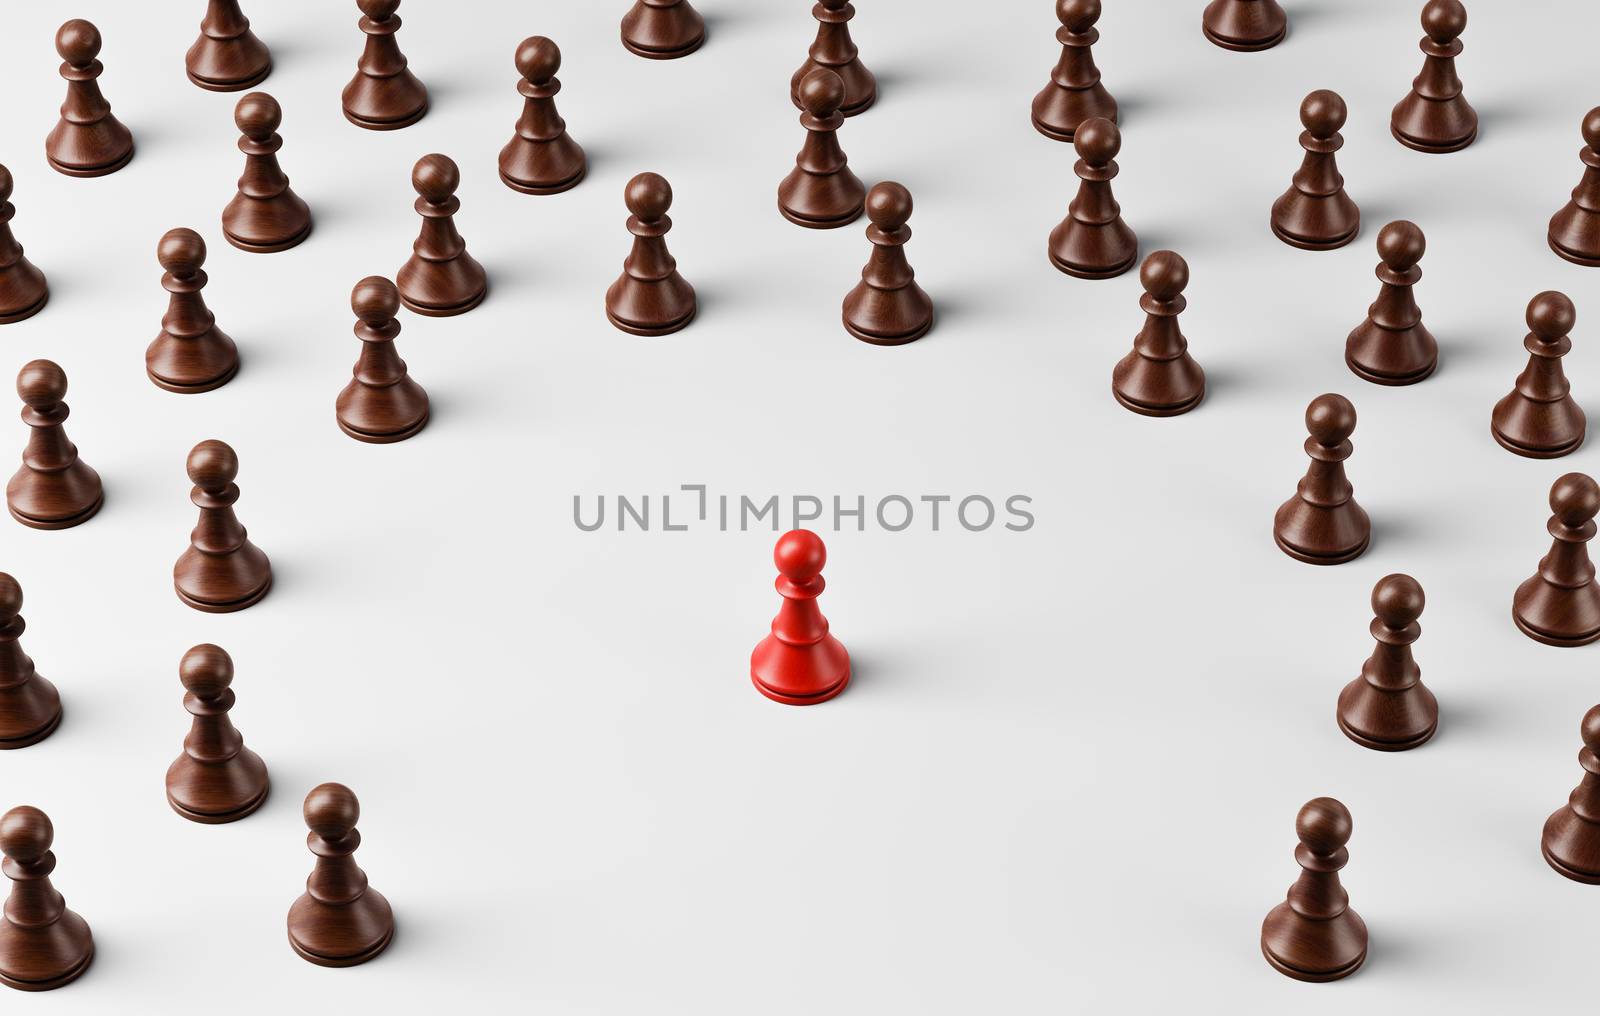 Crowd of Black Wooden Chessman Watching the Red Leader 3D Illustration, Leadership Concept